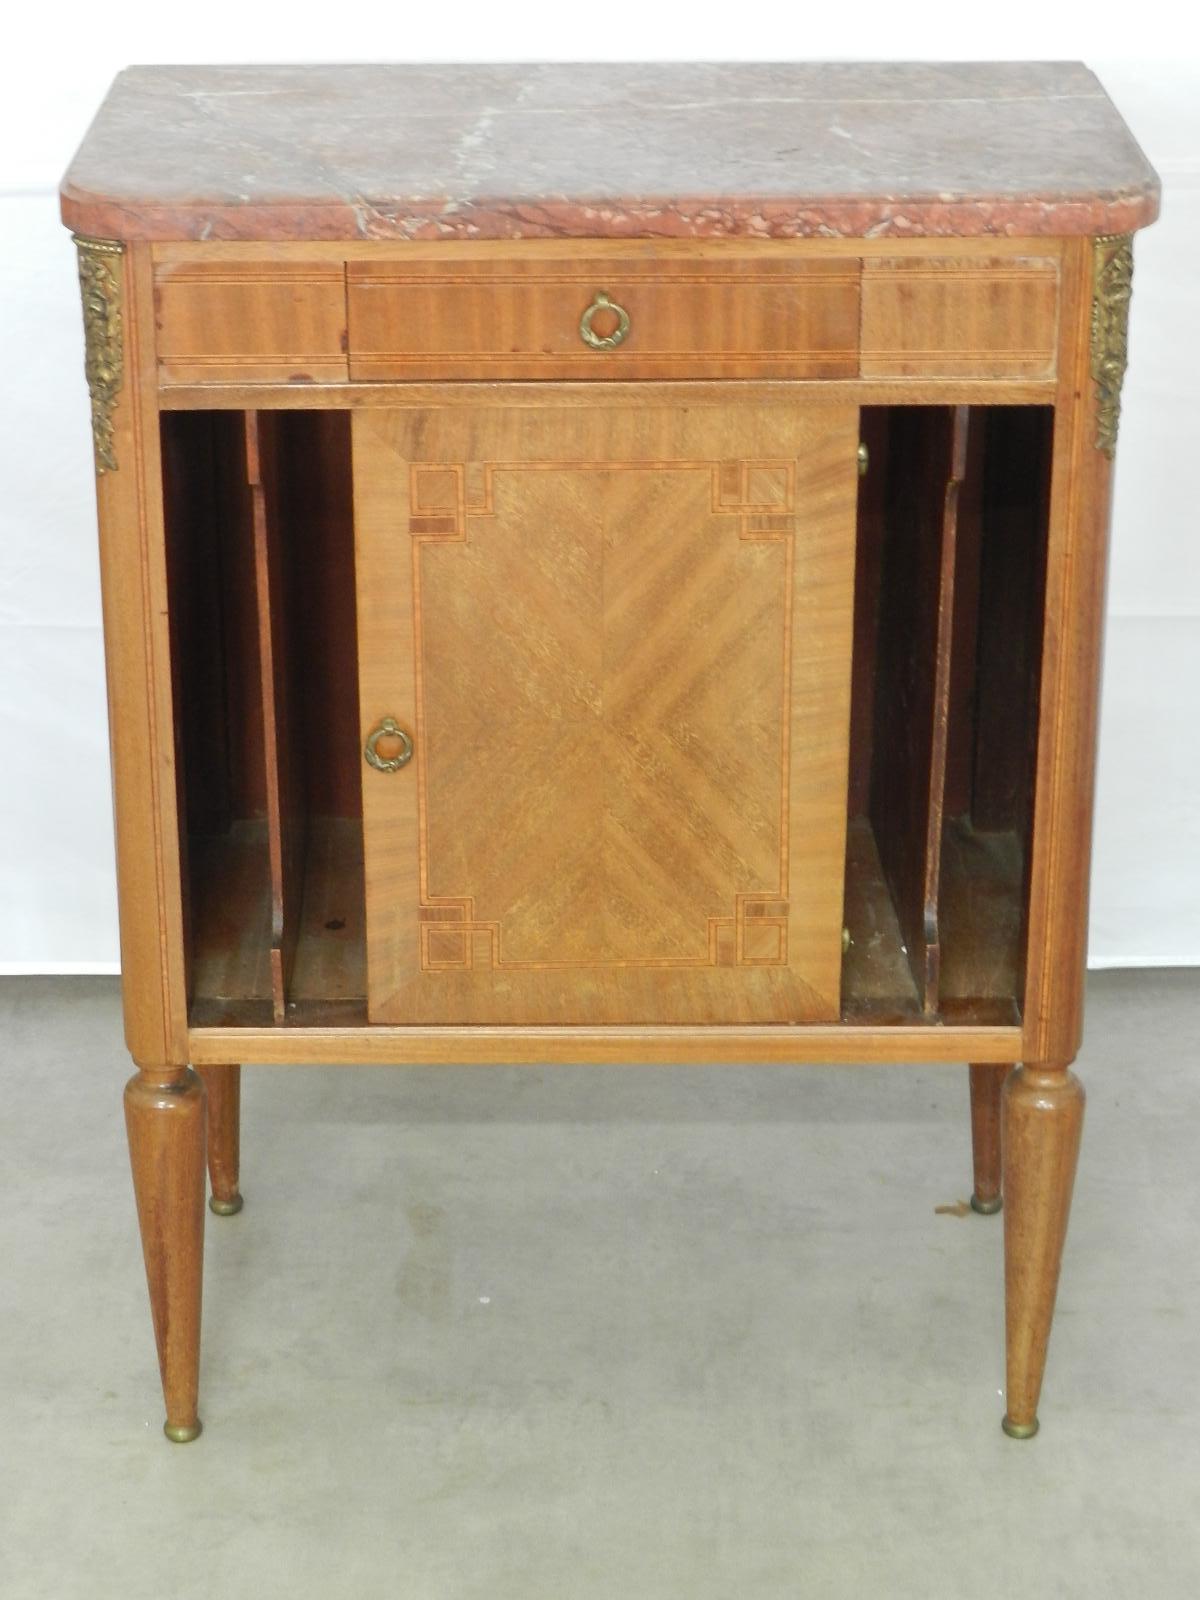 French Louis XVI rev side cabinet marquetry ormolu, circa 1920
Marquetry and Ormolu gilt bronze
Variegated rouge marble top
Very handsome
Very good antique condition with only very minor marks of use.
We will be listing the matching Armoire,